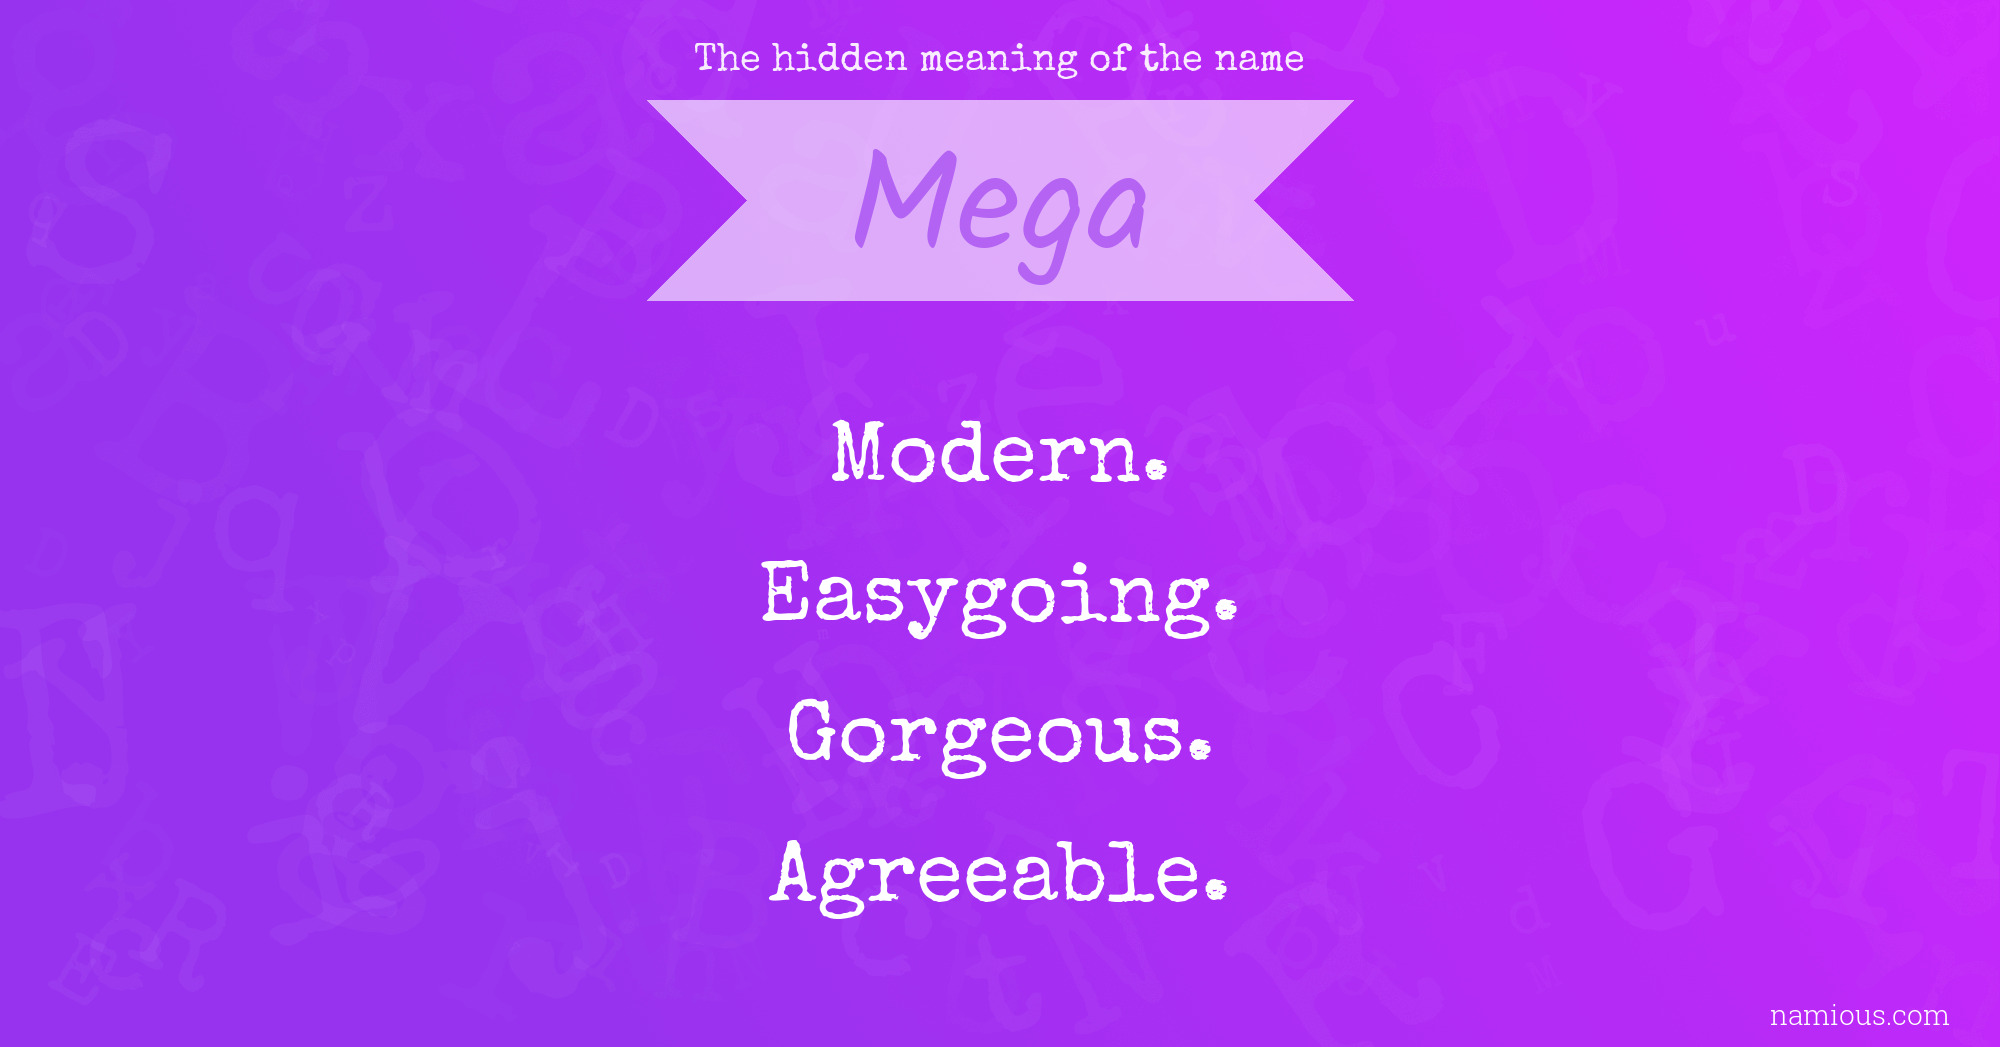 The hidden meaning of the name Mega